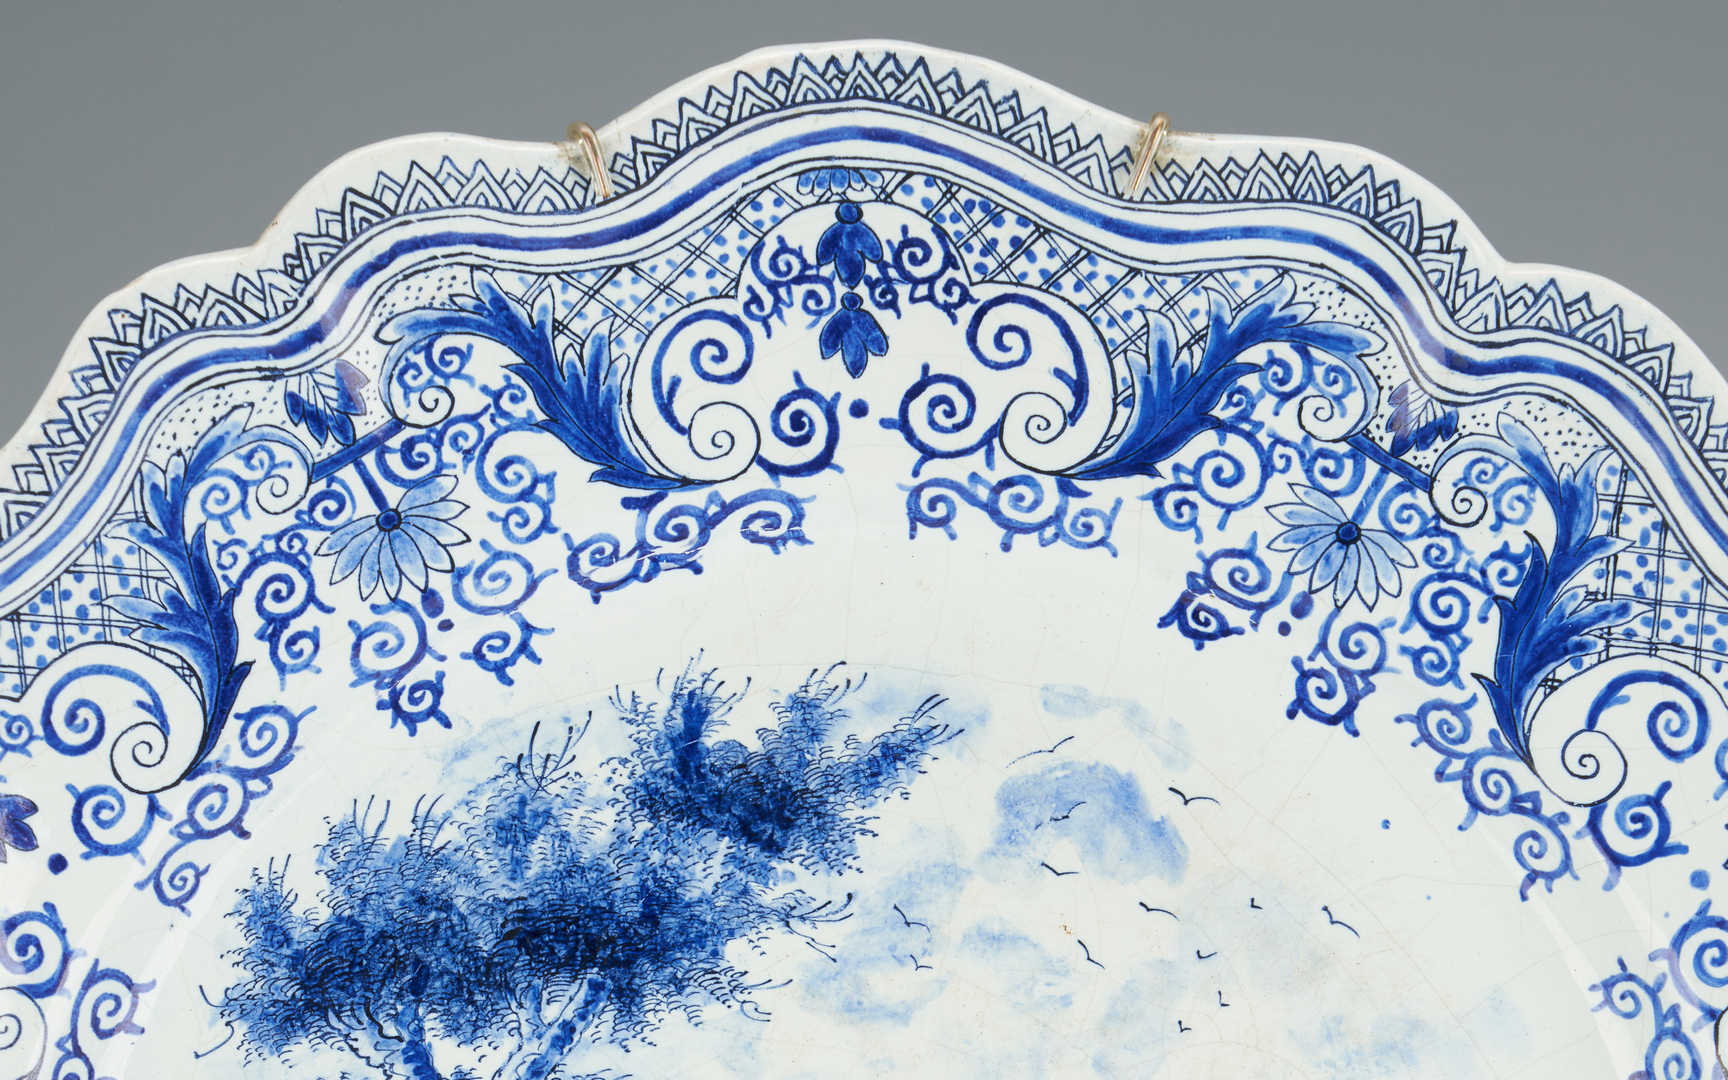 Lot 363: Large 17th C. Delft Charger, Courting Couple